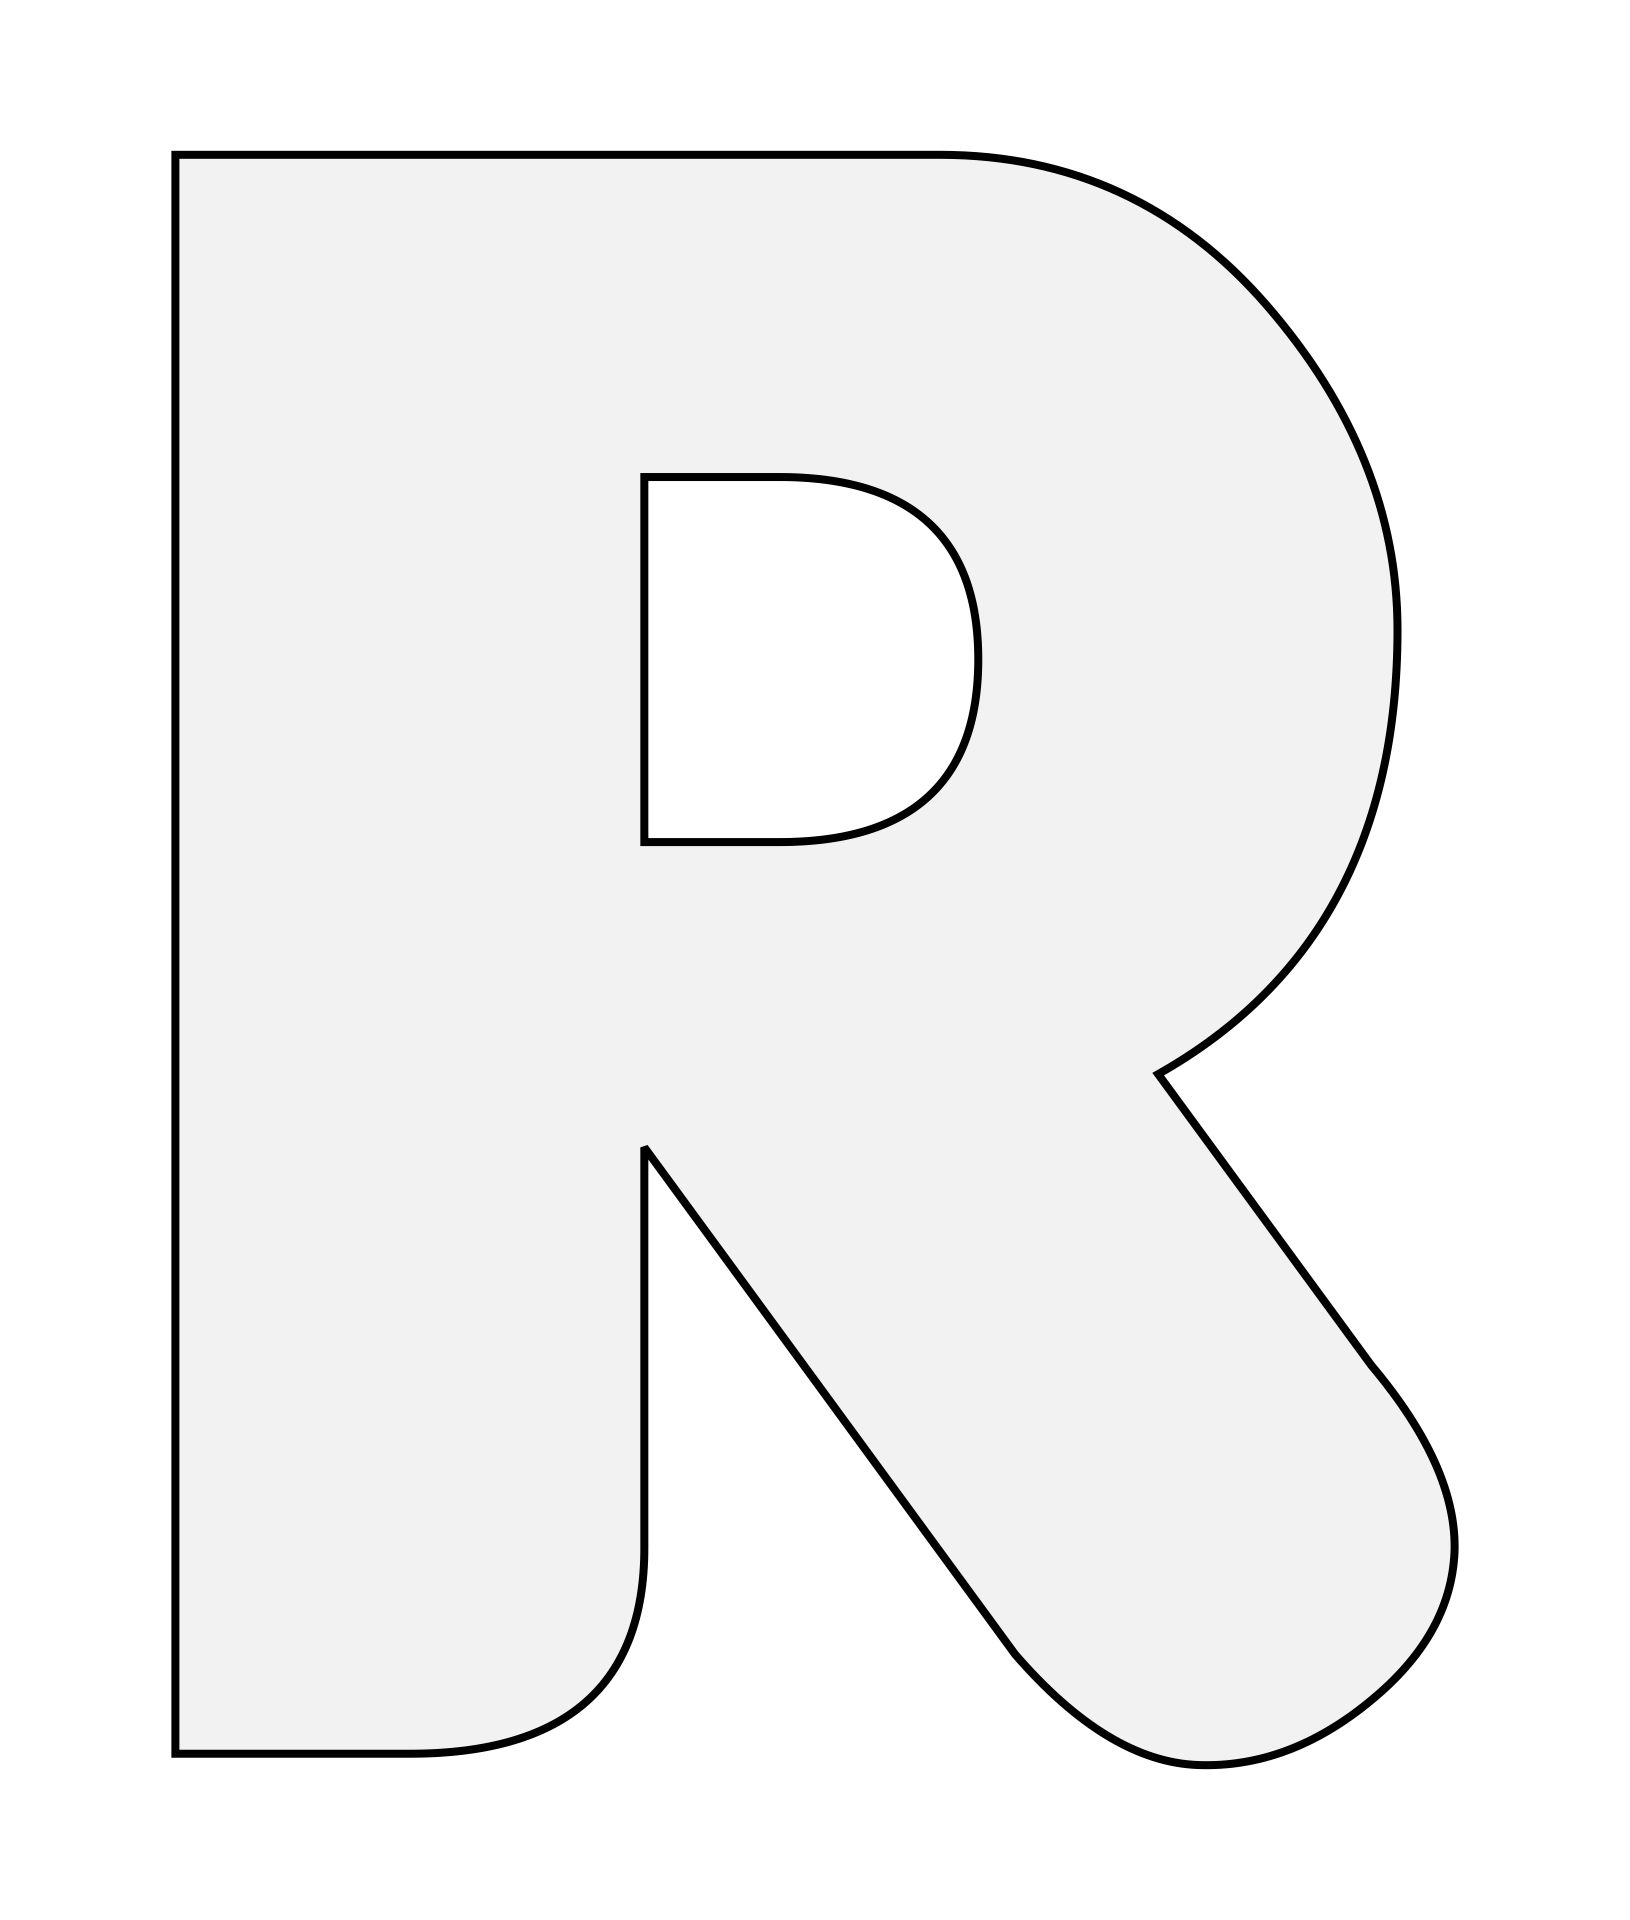 8-best-images-of-letter-r-template-printable-free-printable-alphabet-templates-letter-r